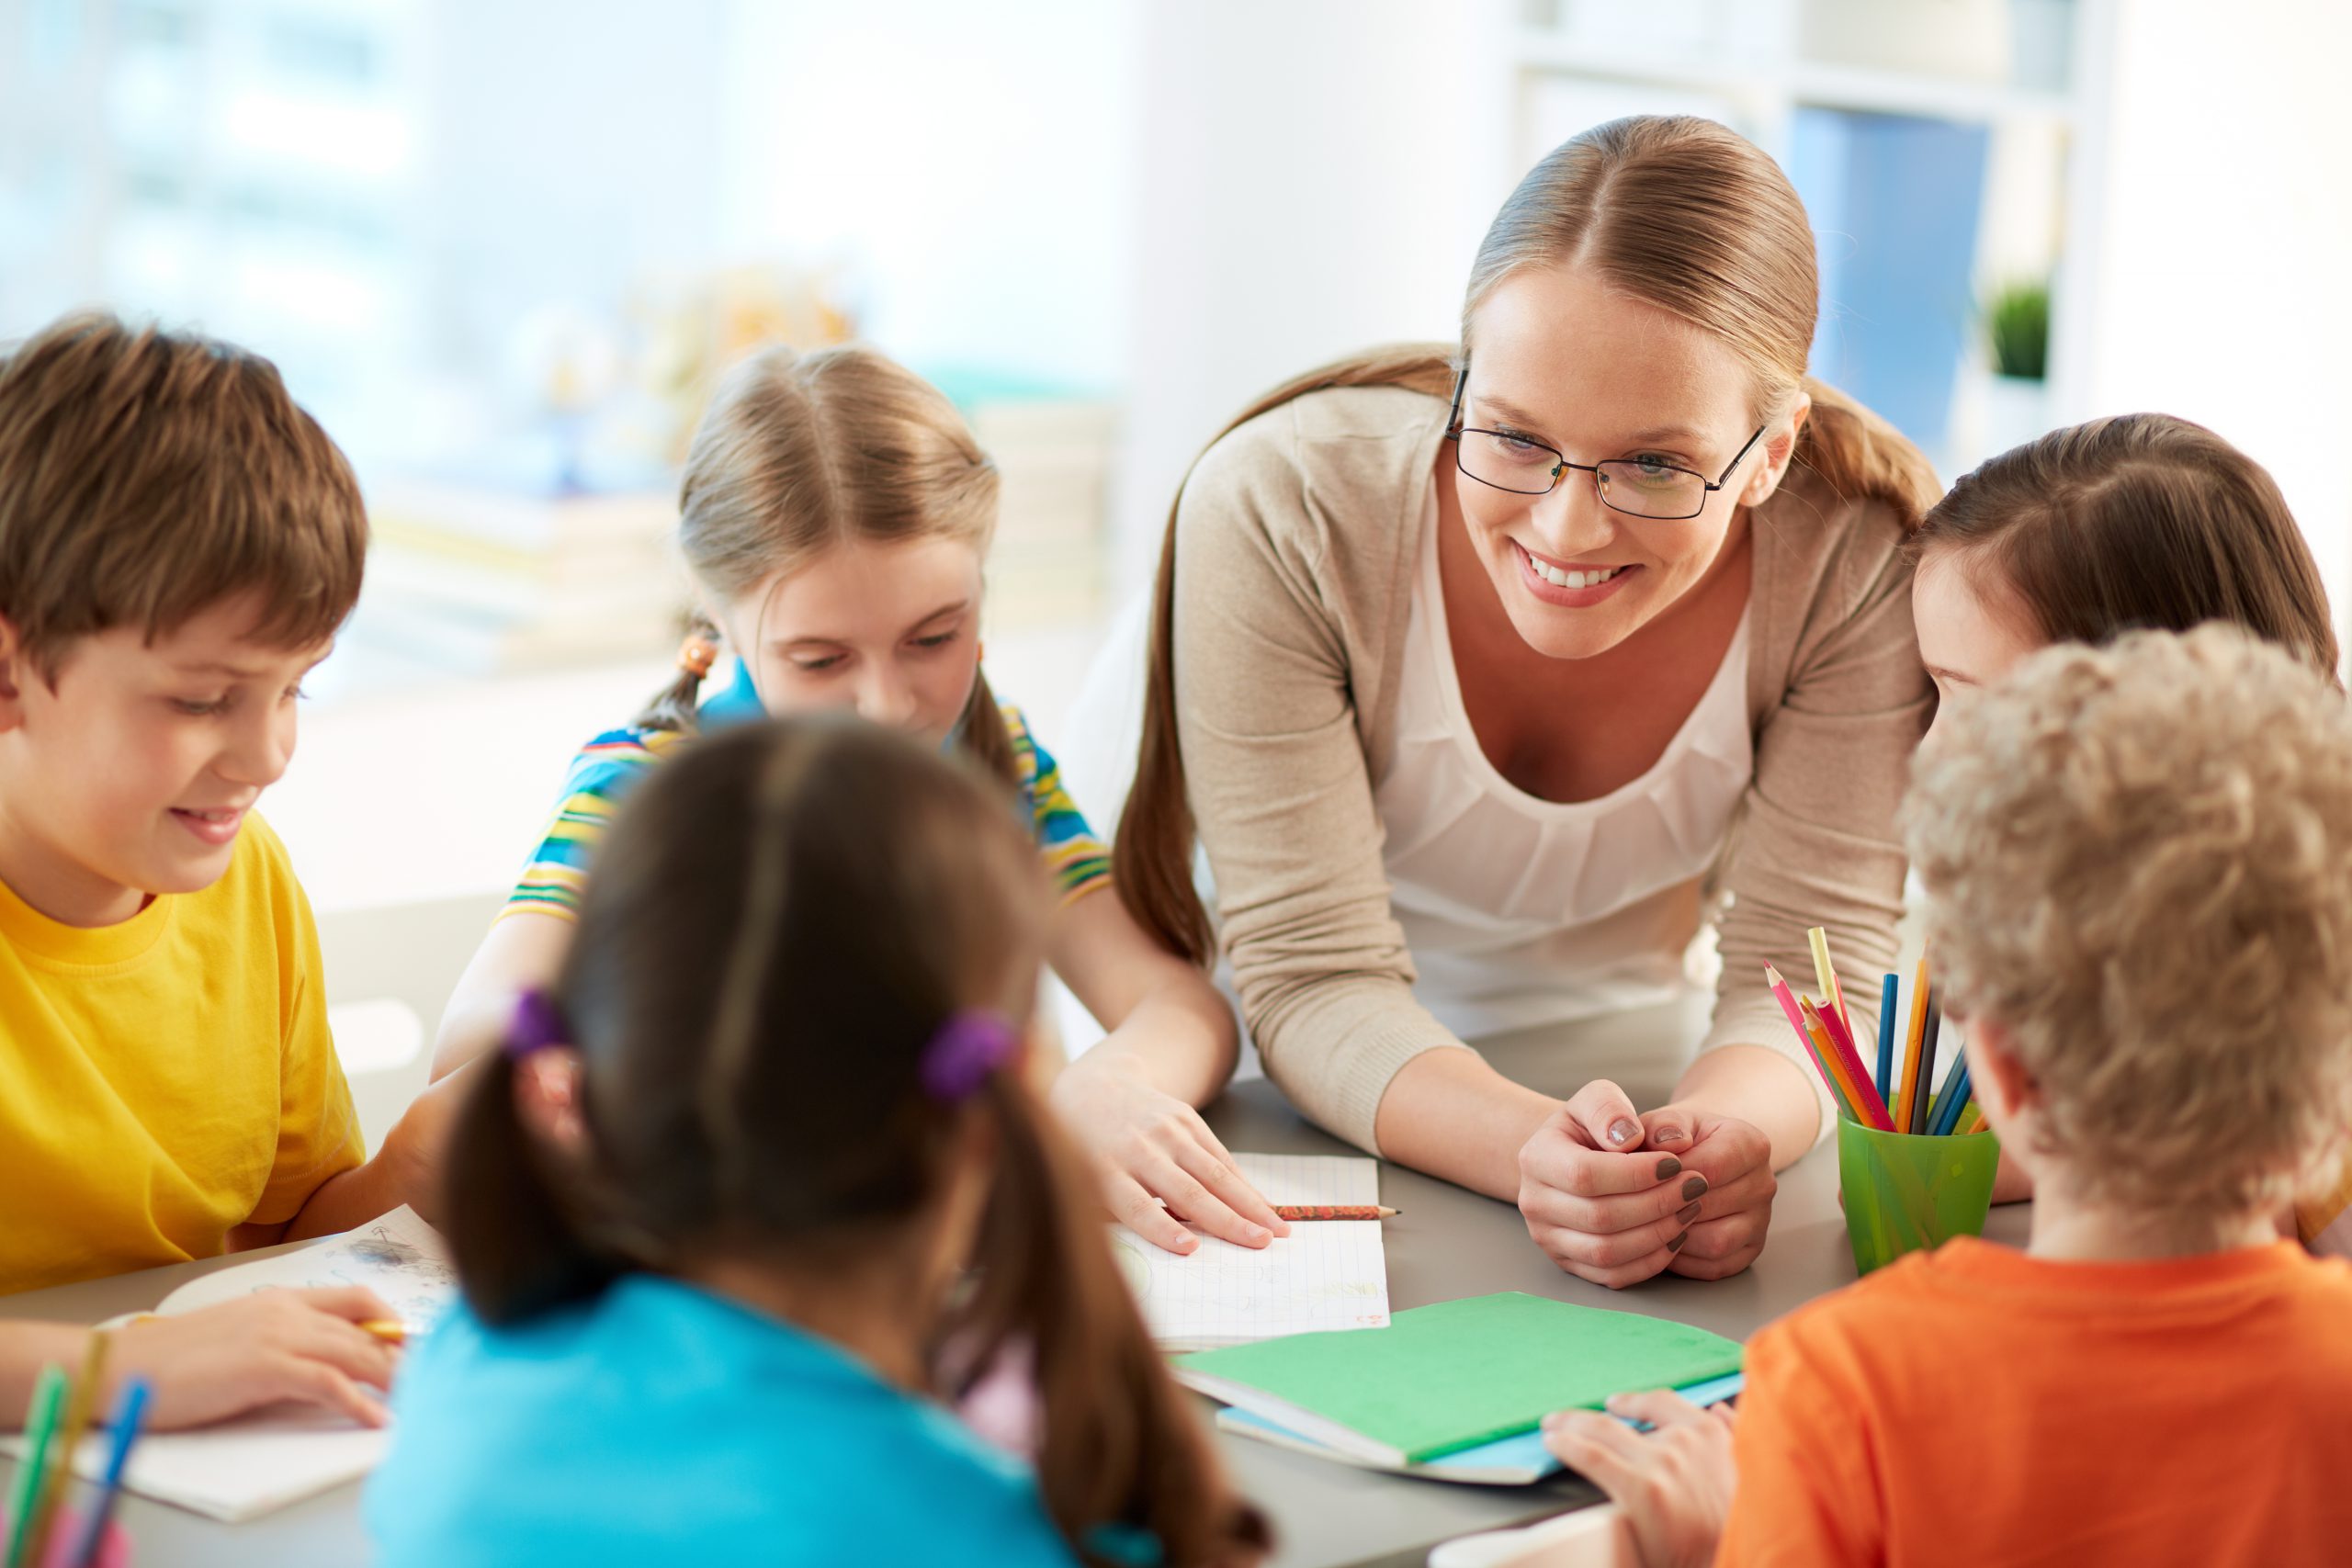 Psychological education and trainings for children, social workers, and parents